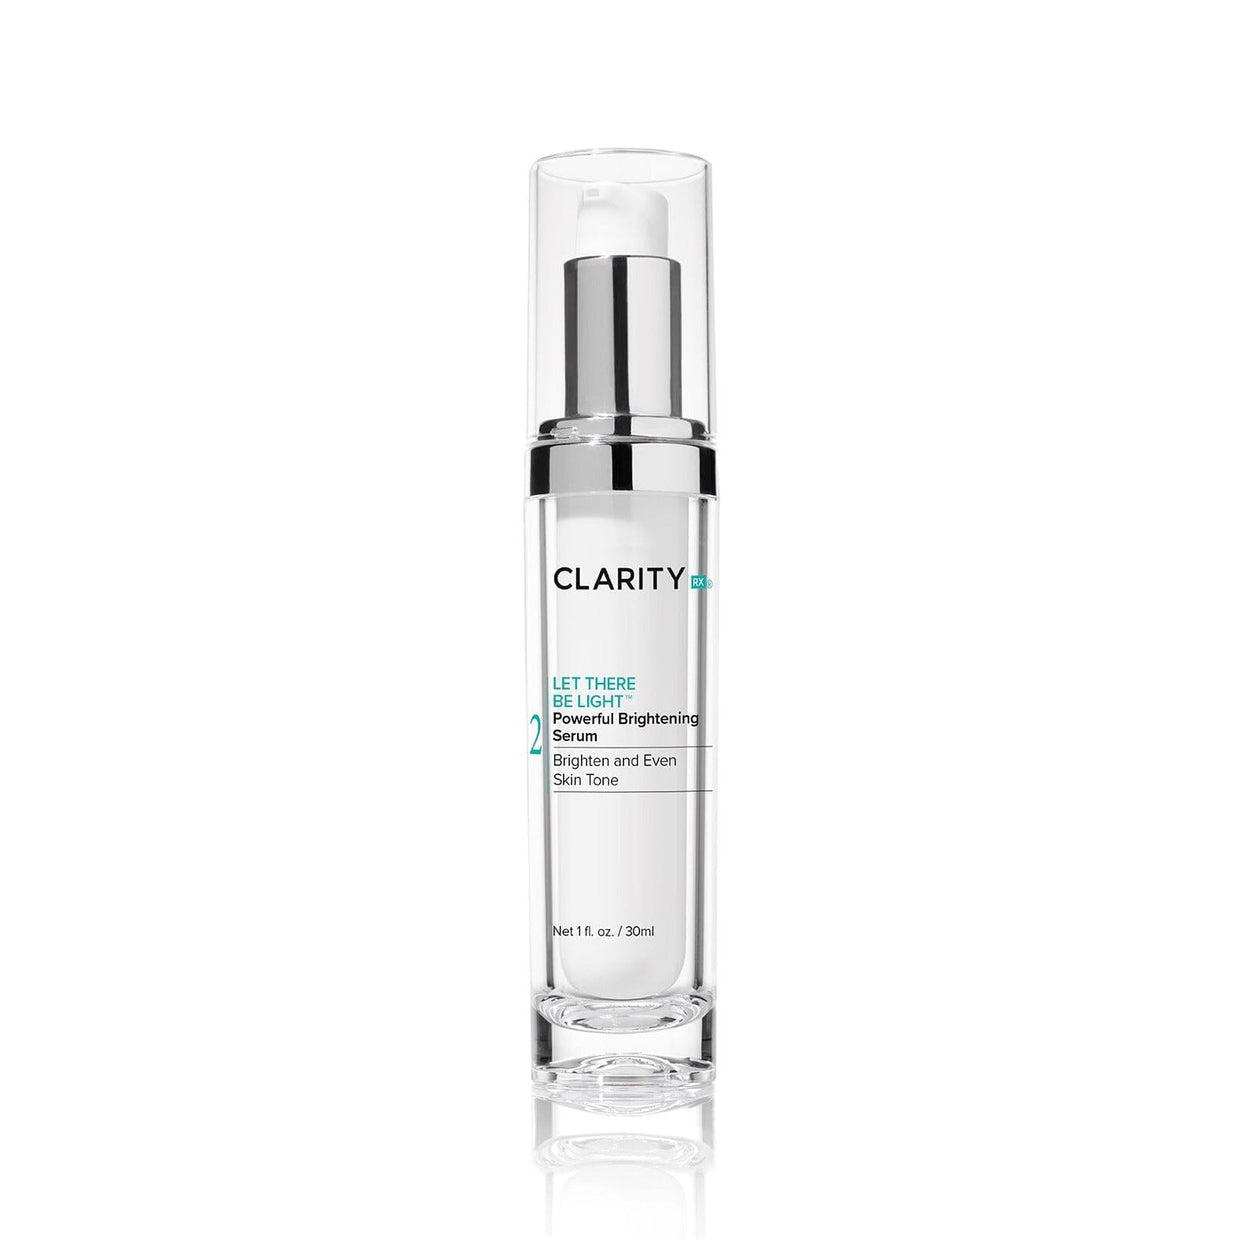 ClarityRx Let There Be Light Powerful Lightening Serum ClarityRx 1.0 fl. oz. Shop at Exclusive Beauty Club